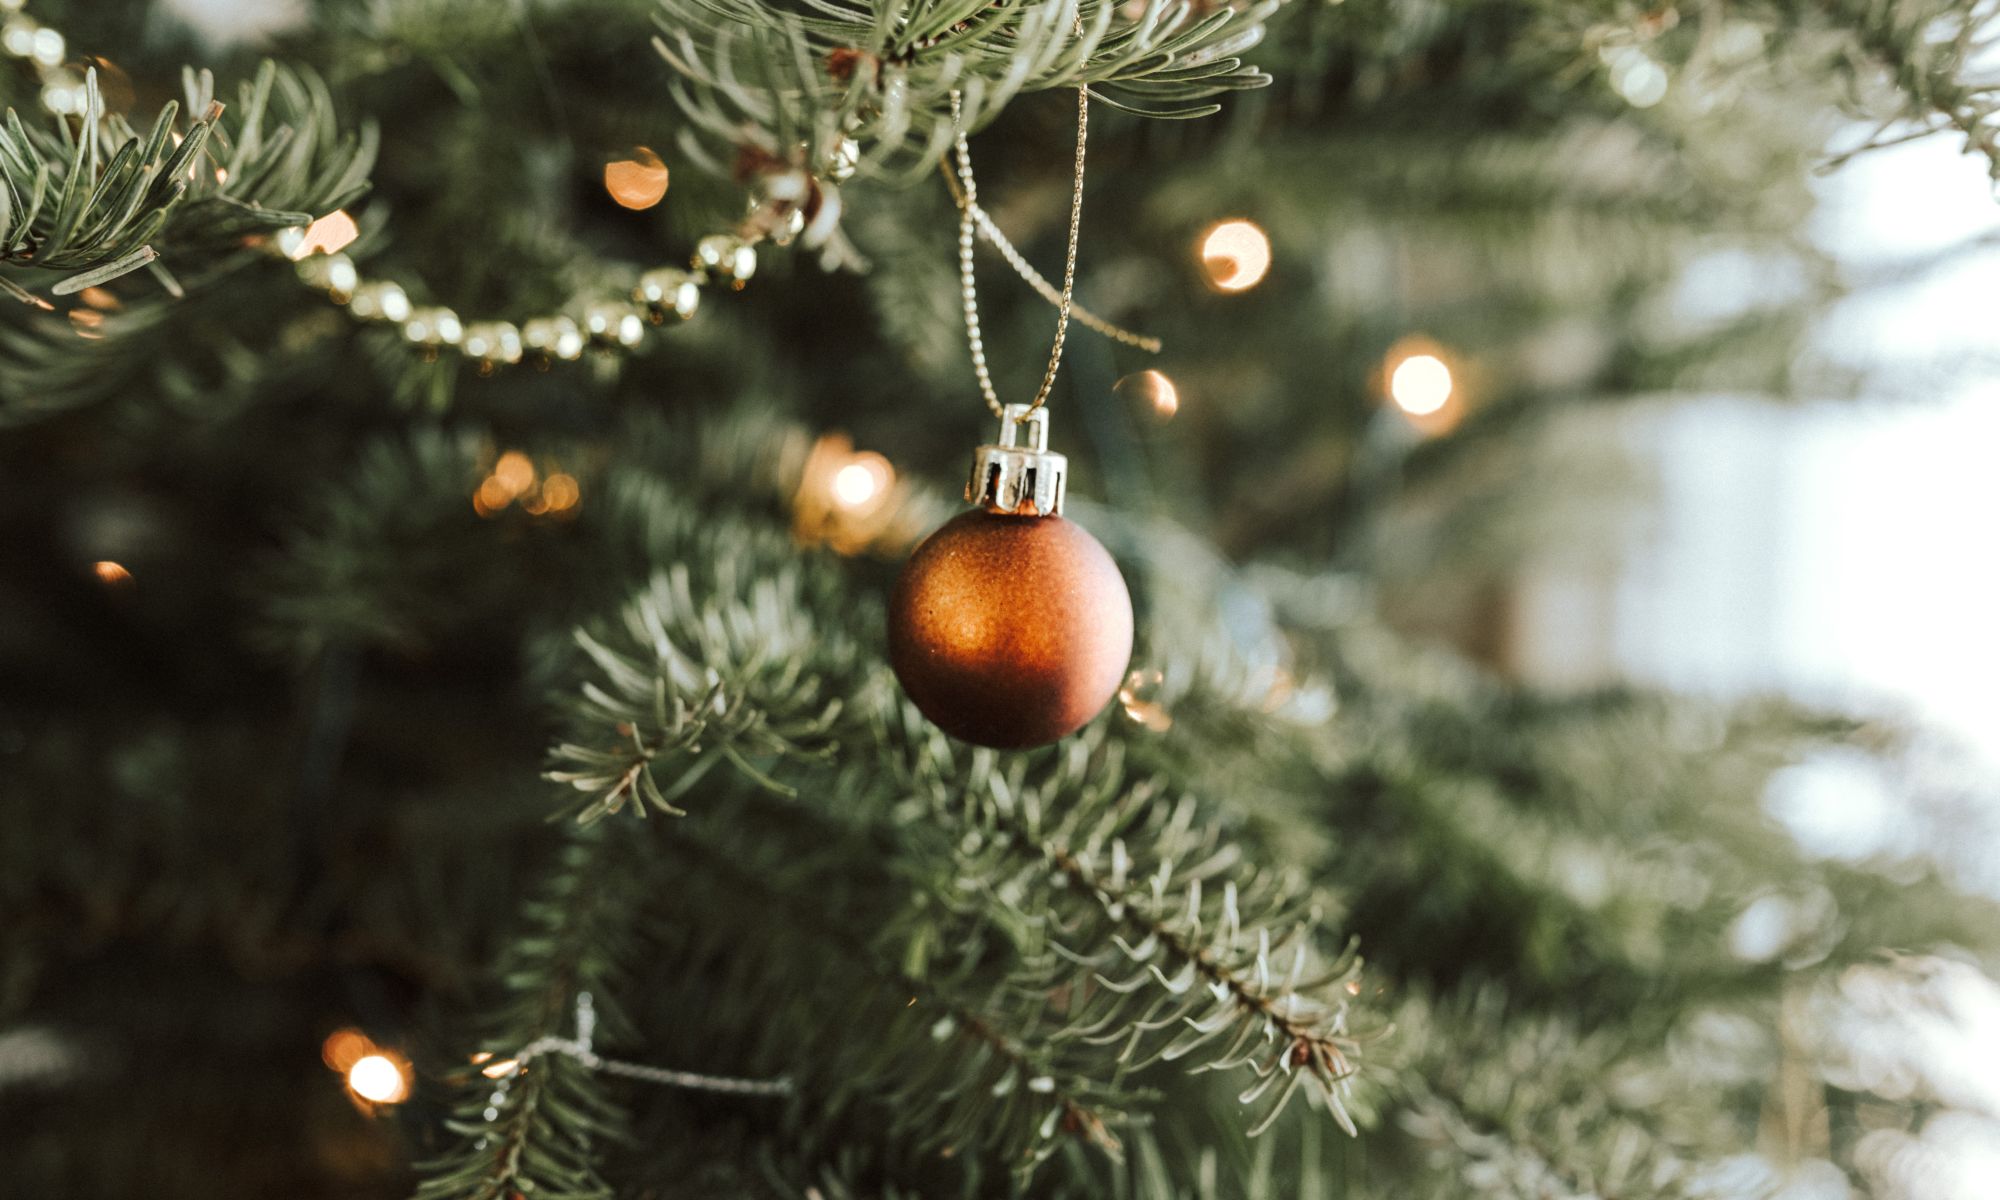 A red Christmas ornament hanging from a festive tree